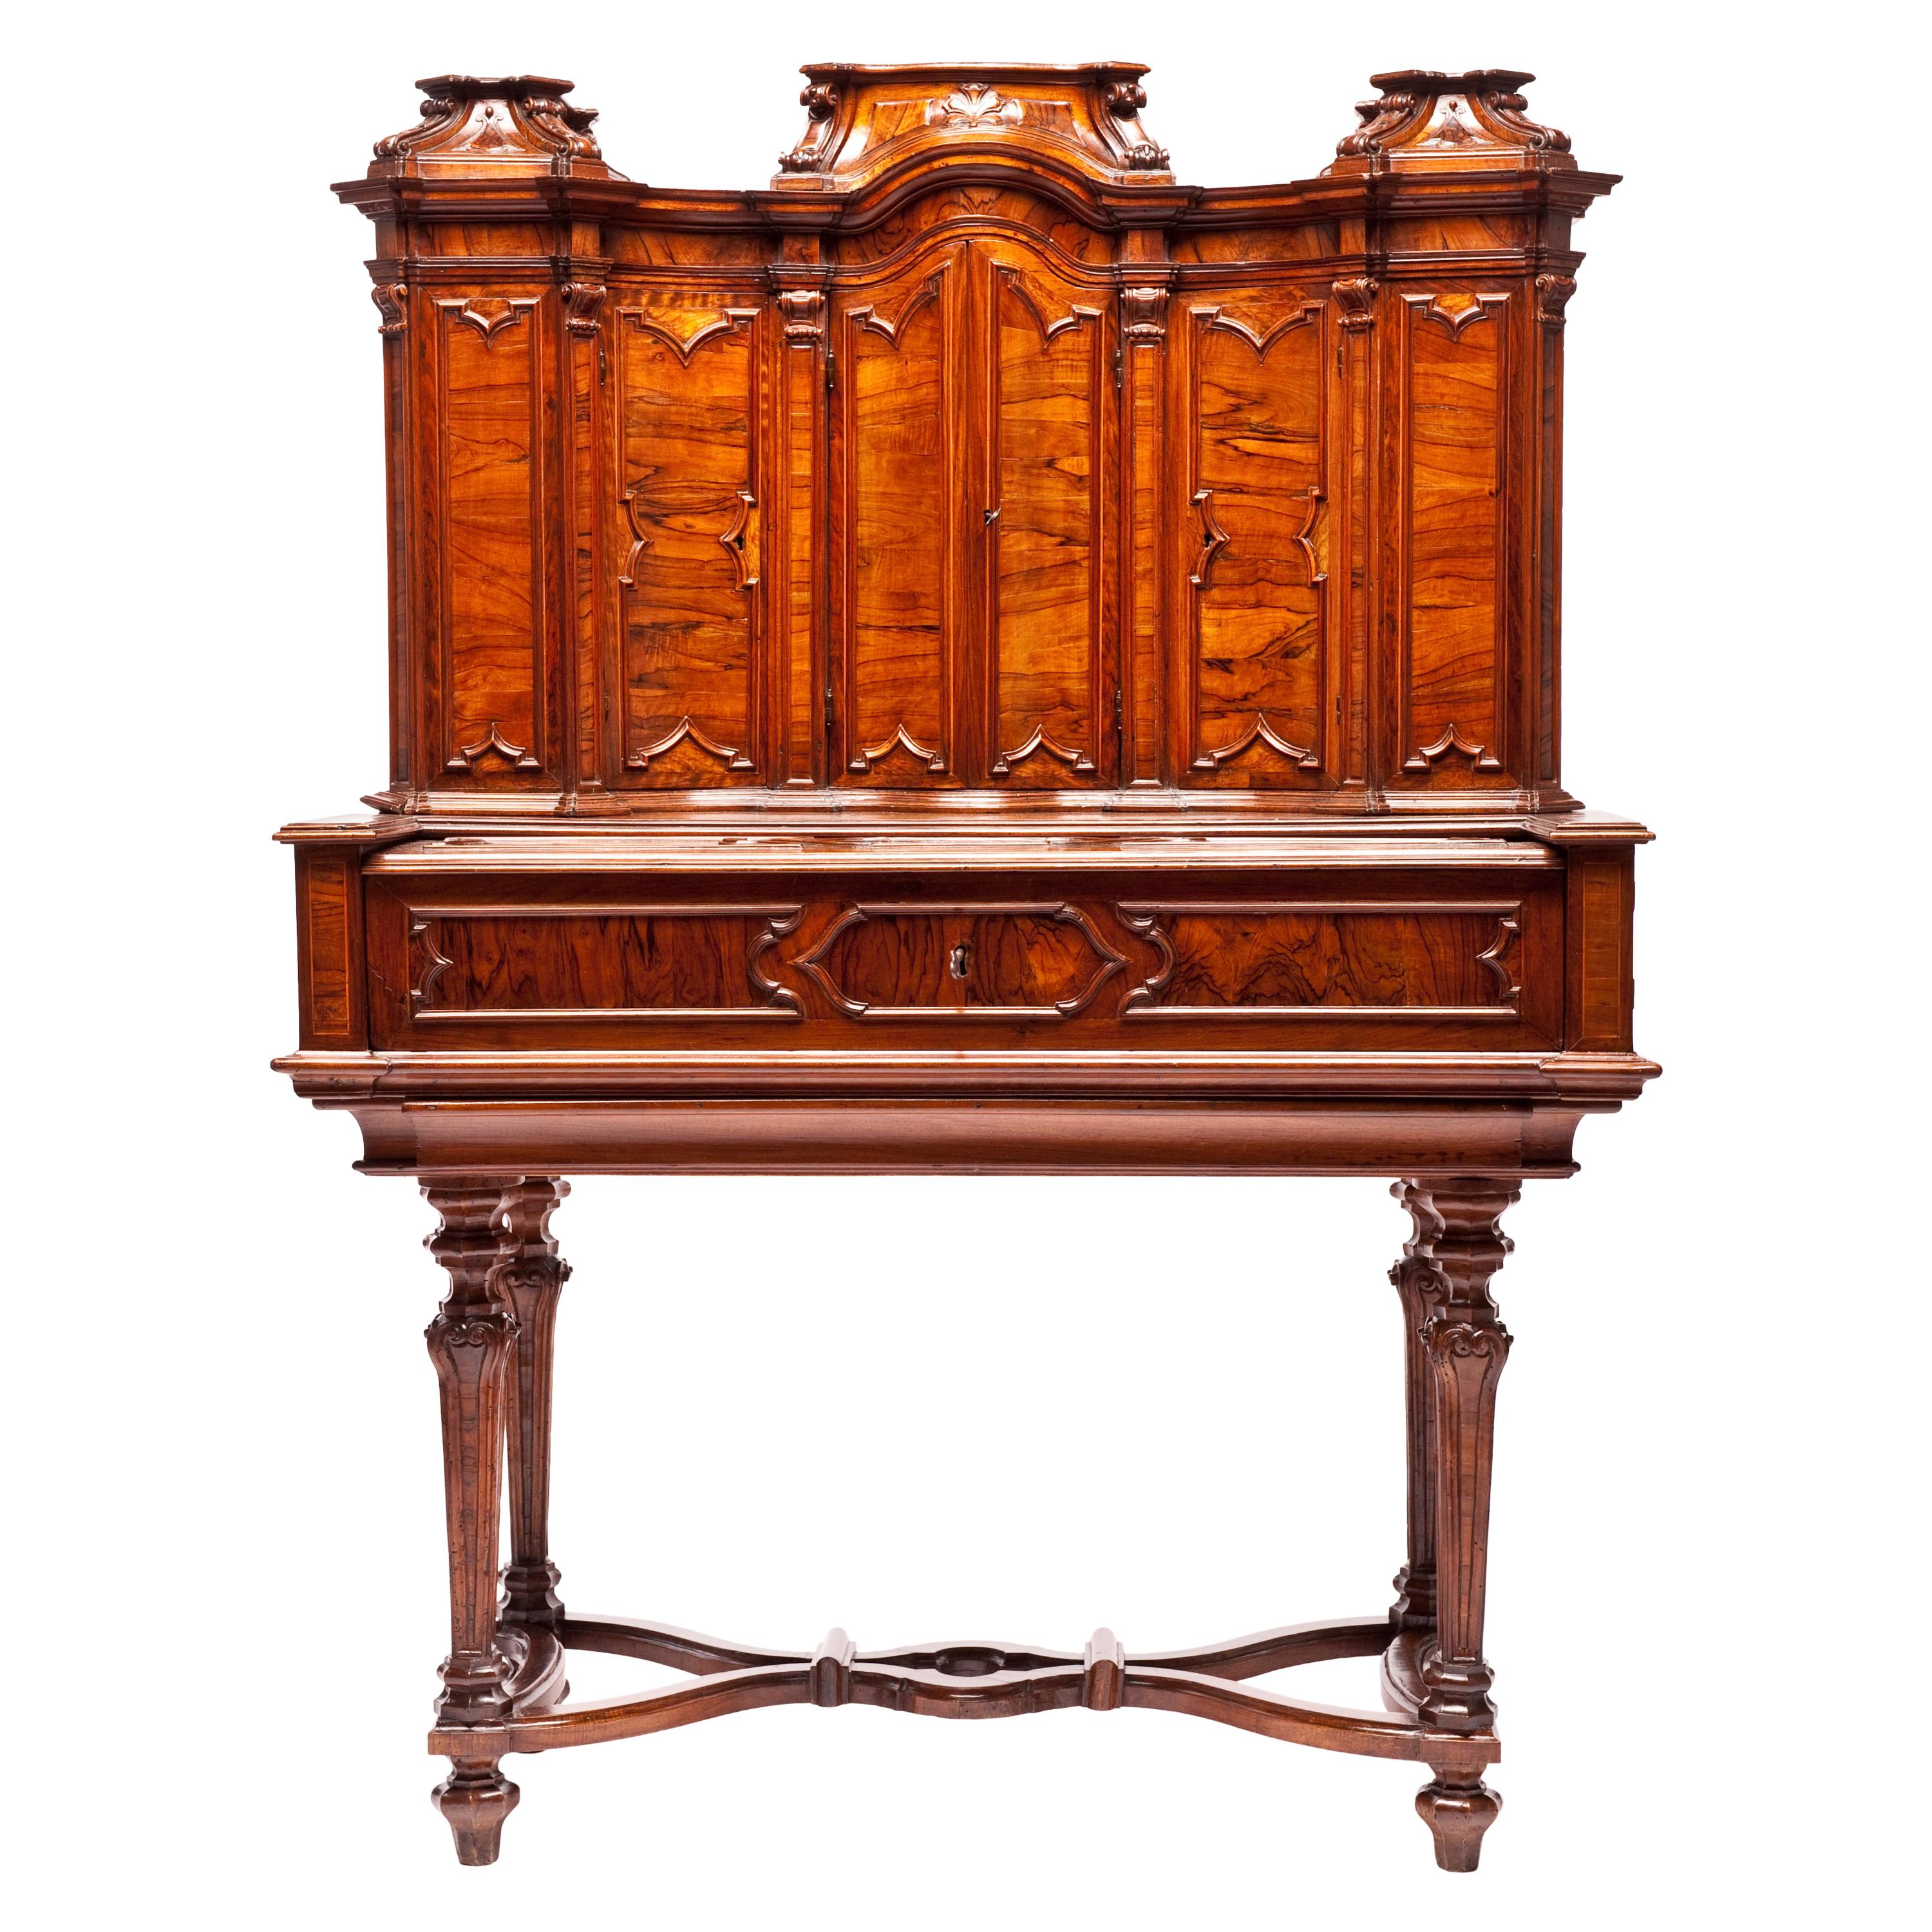 Ancient Italian Writing Desk with Upper Cabinet, Milan, Circa 1730 For Sale